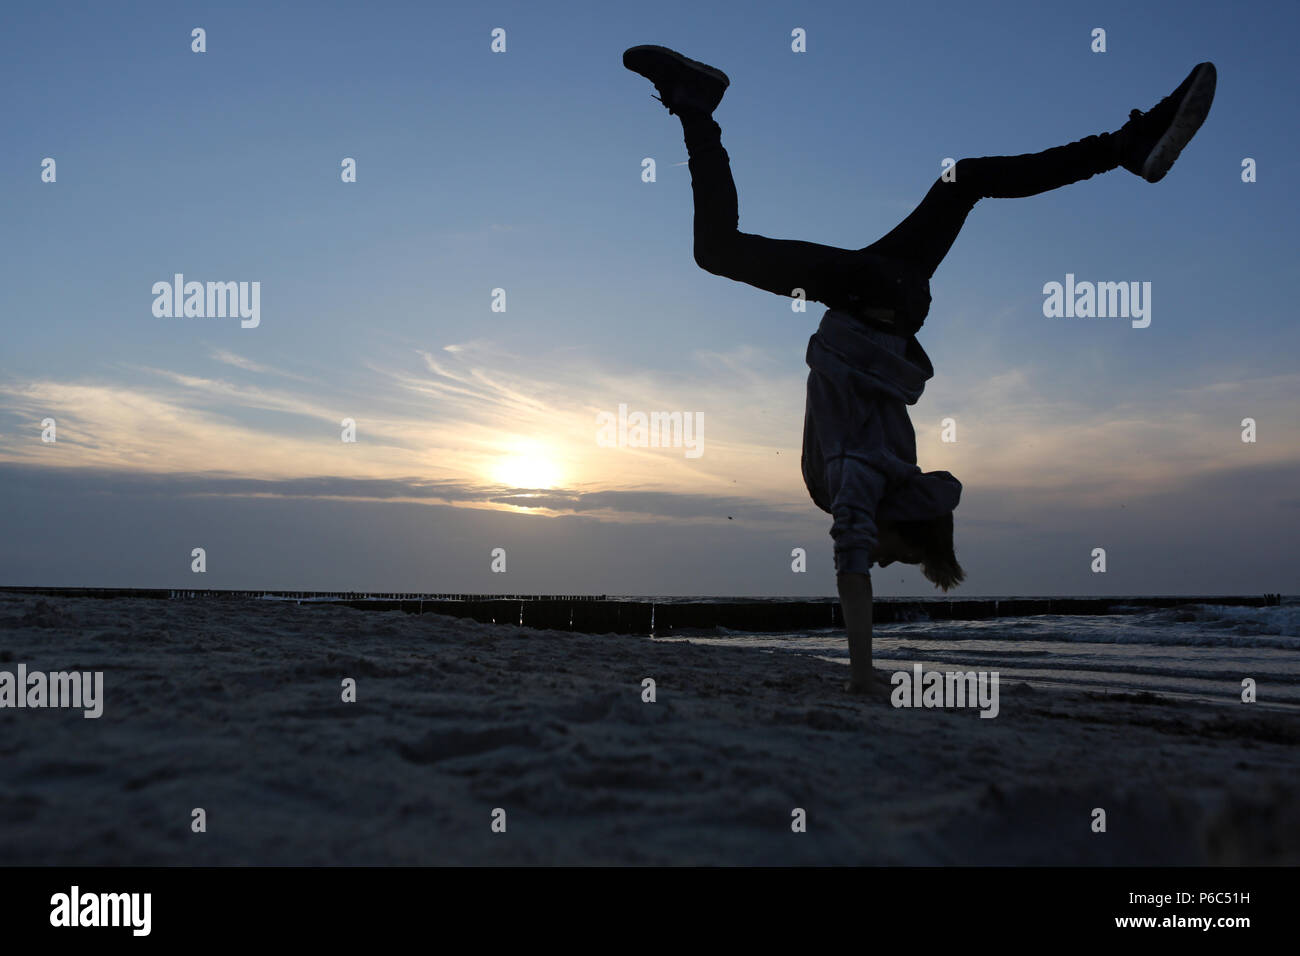 Wustrow, Germany - Silhouette, boy makes a handstand on the beach Stock Photo